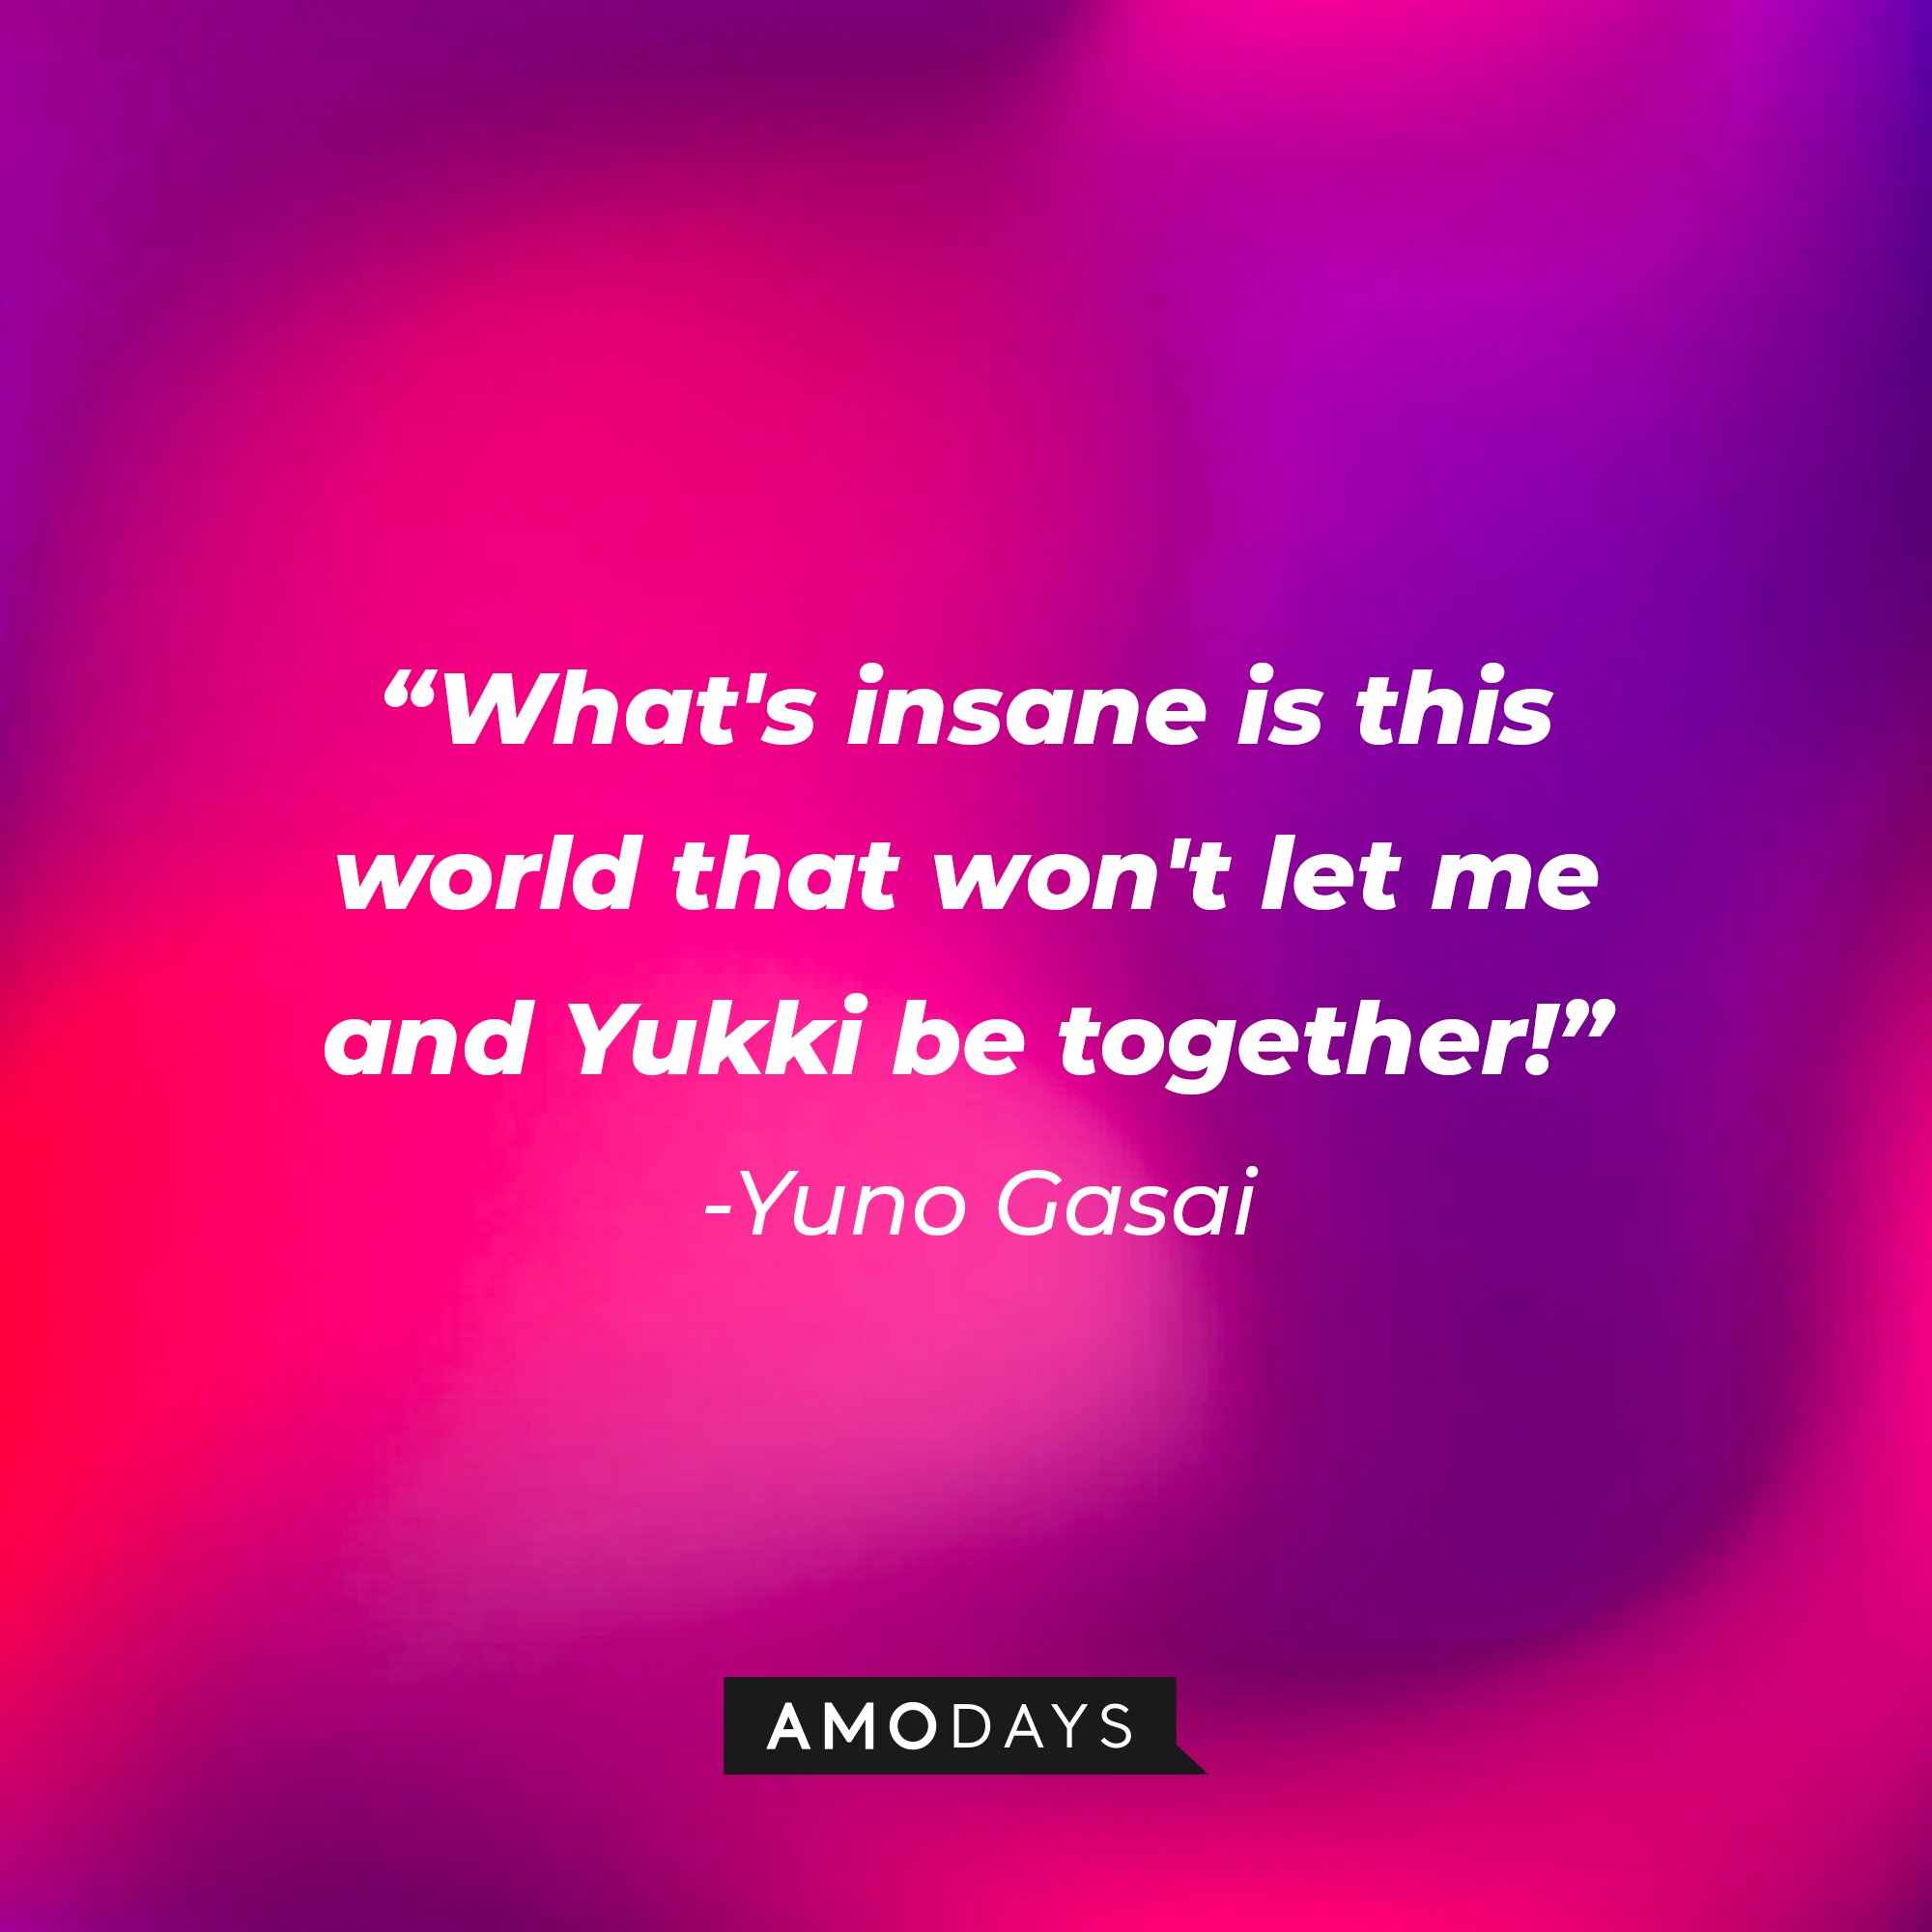 Yuno Gasai‘s quote: “What's insane is this world that won't let me and Yukki be together!” | Image: AmoDays  